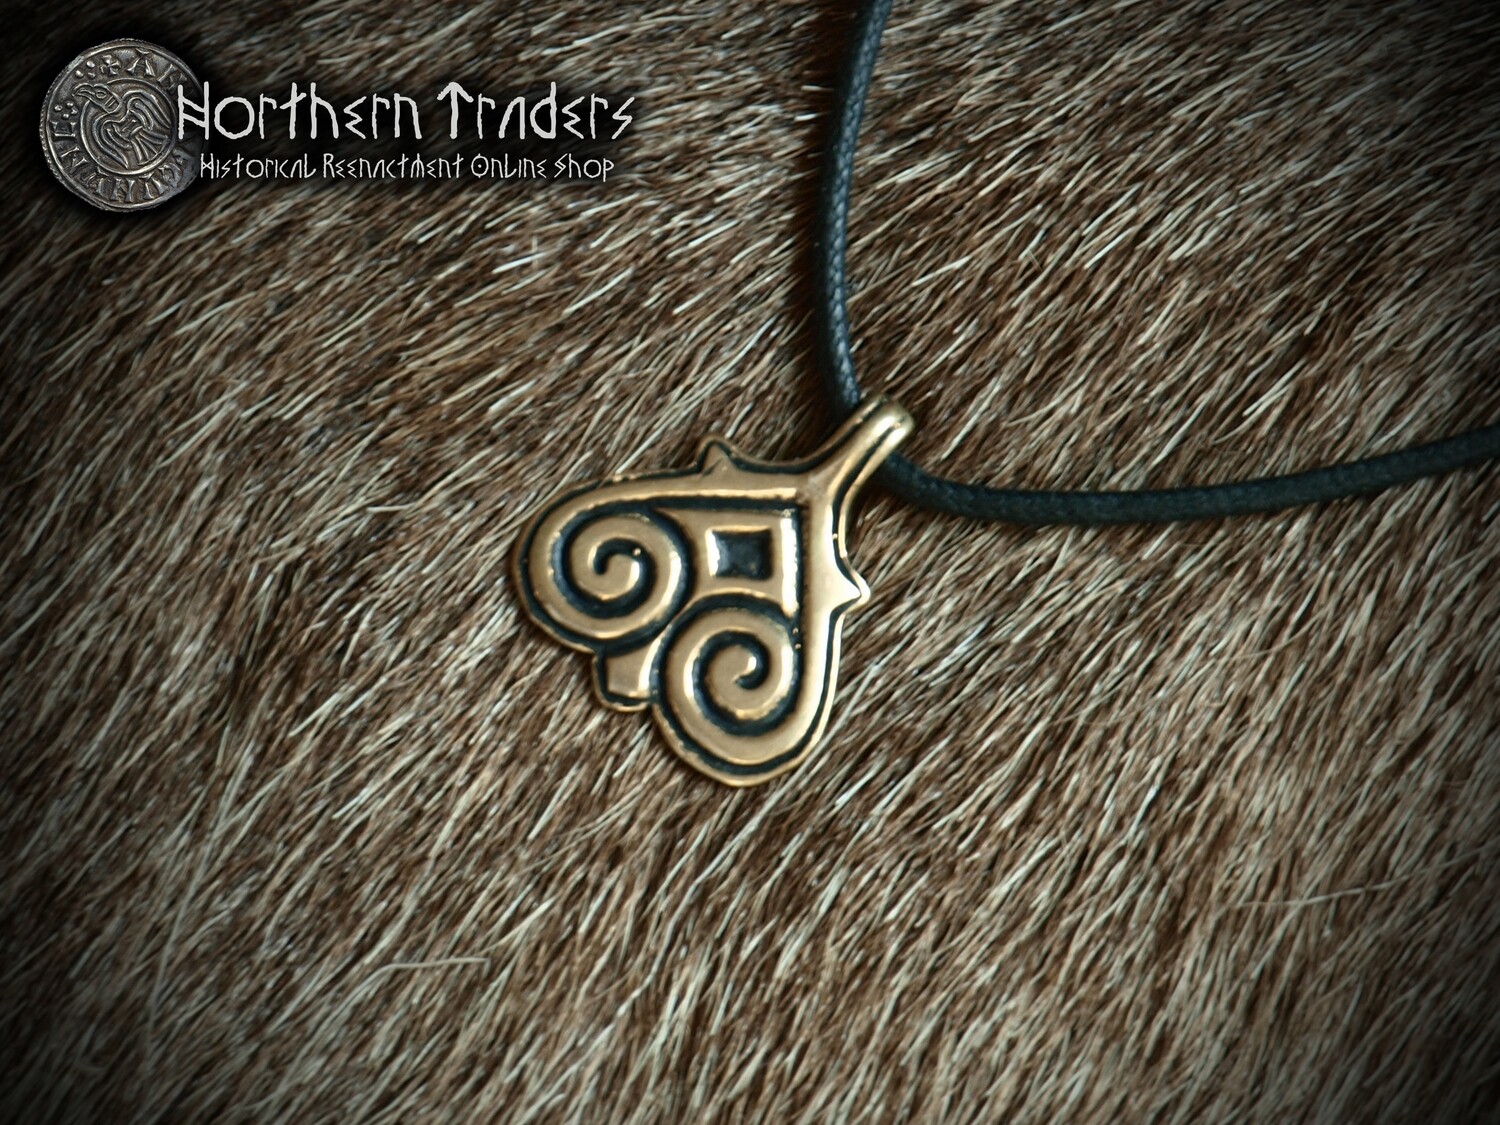 Amulet from Norboten